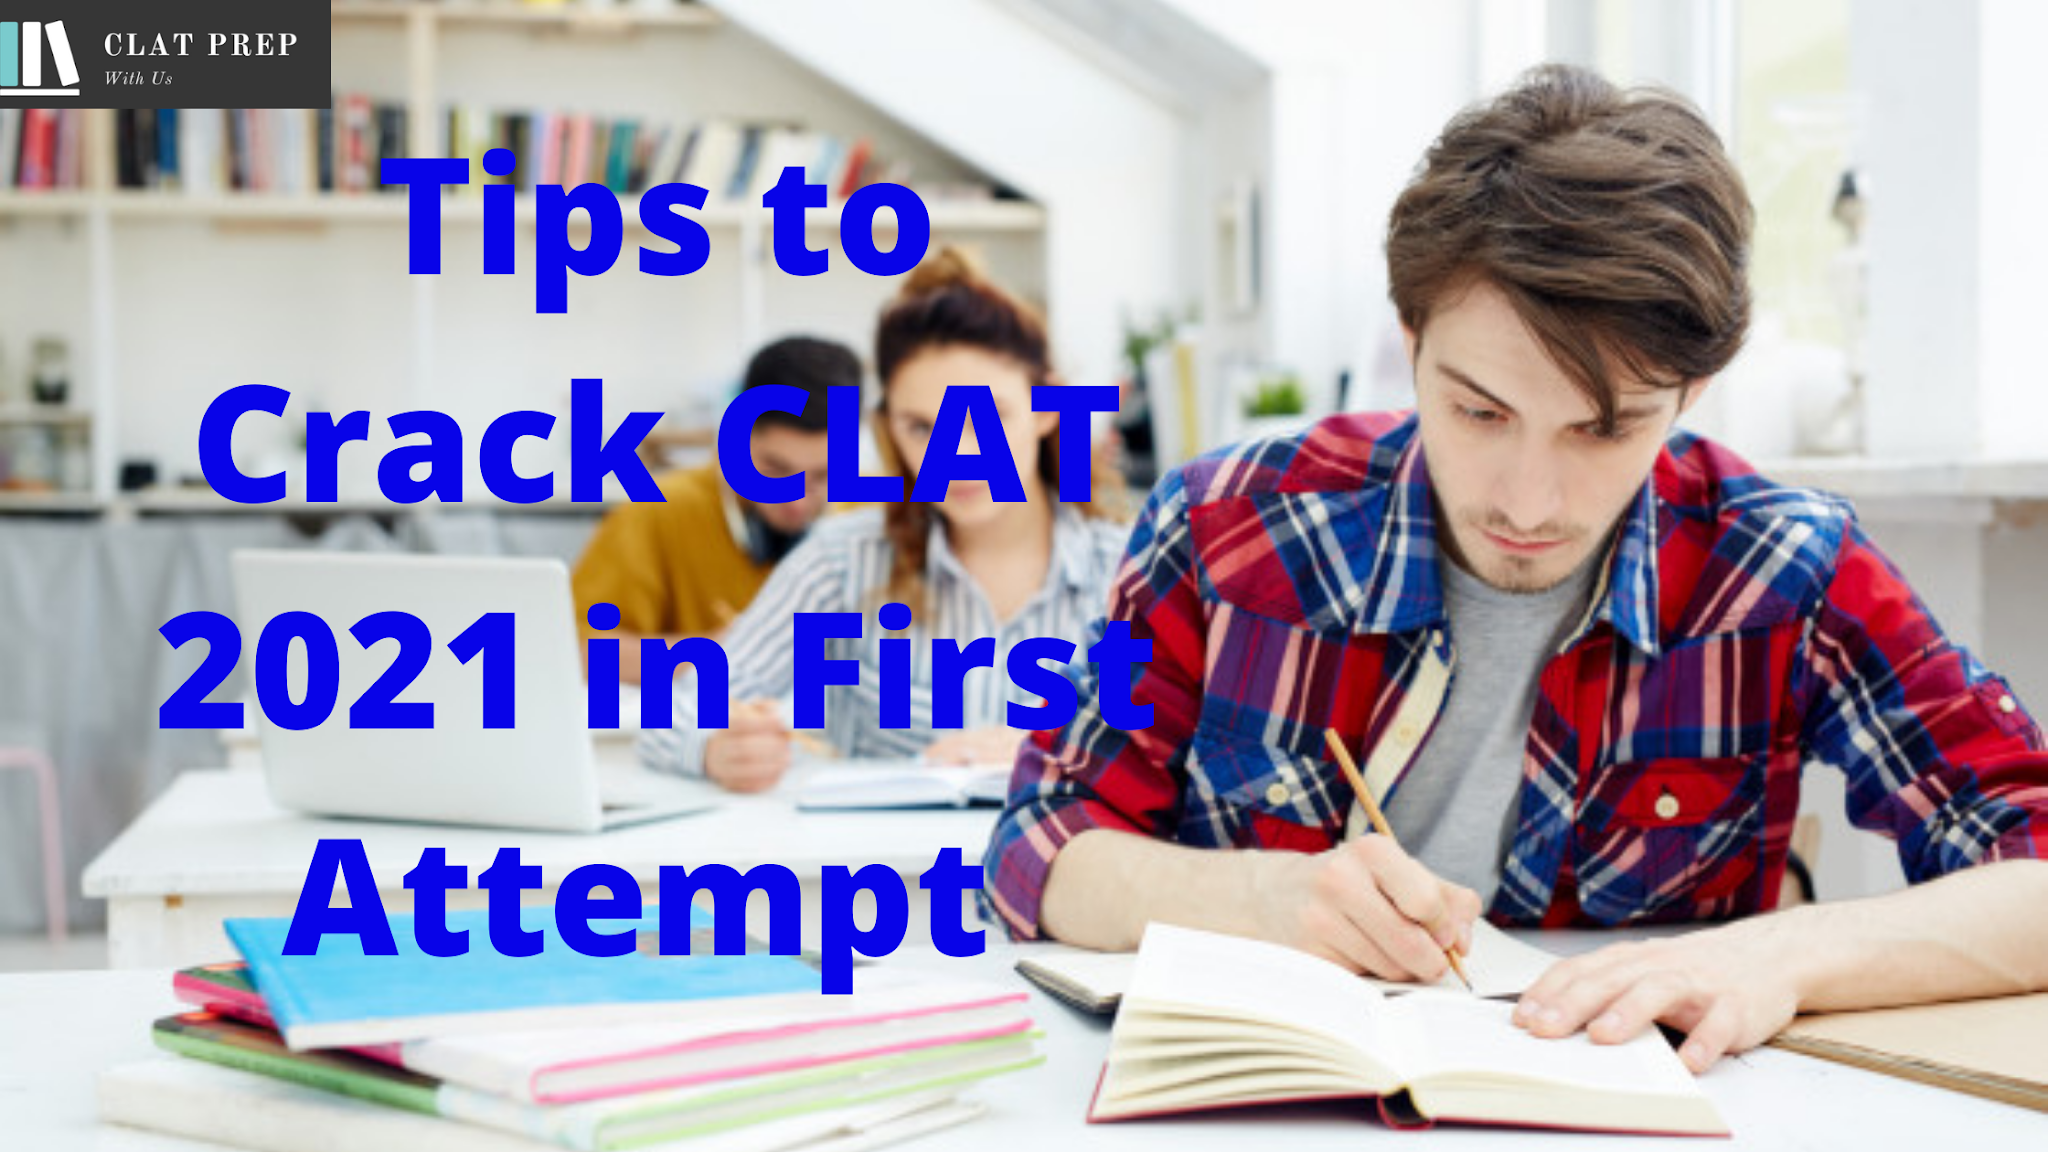 Tips to Crack CLAT 2021 in First Attempt